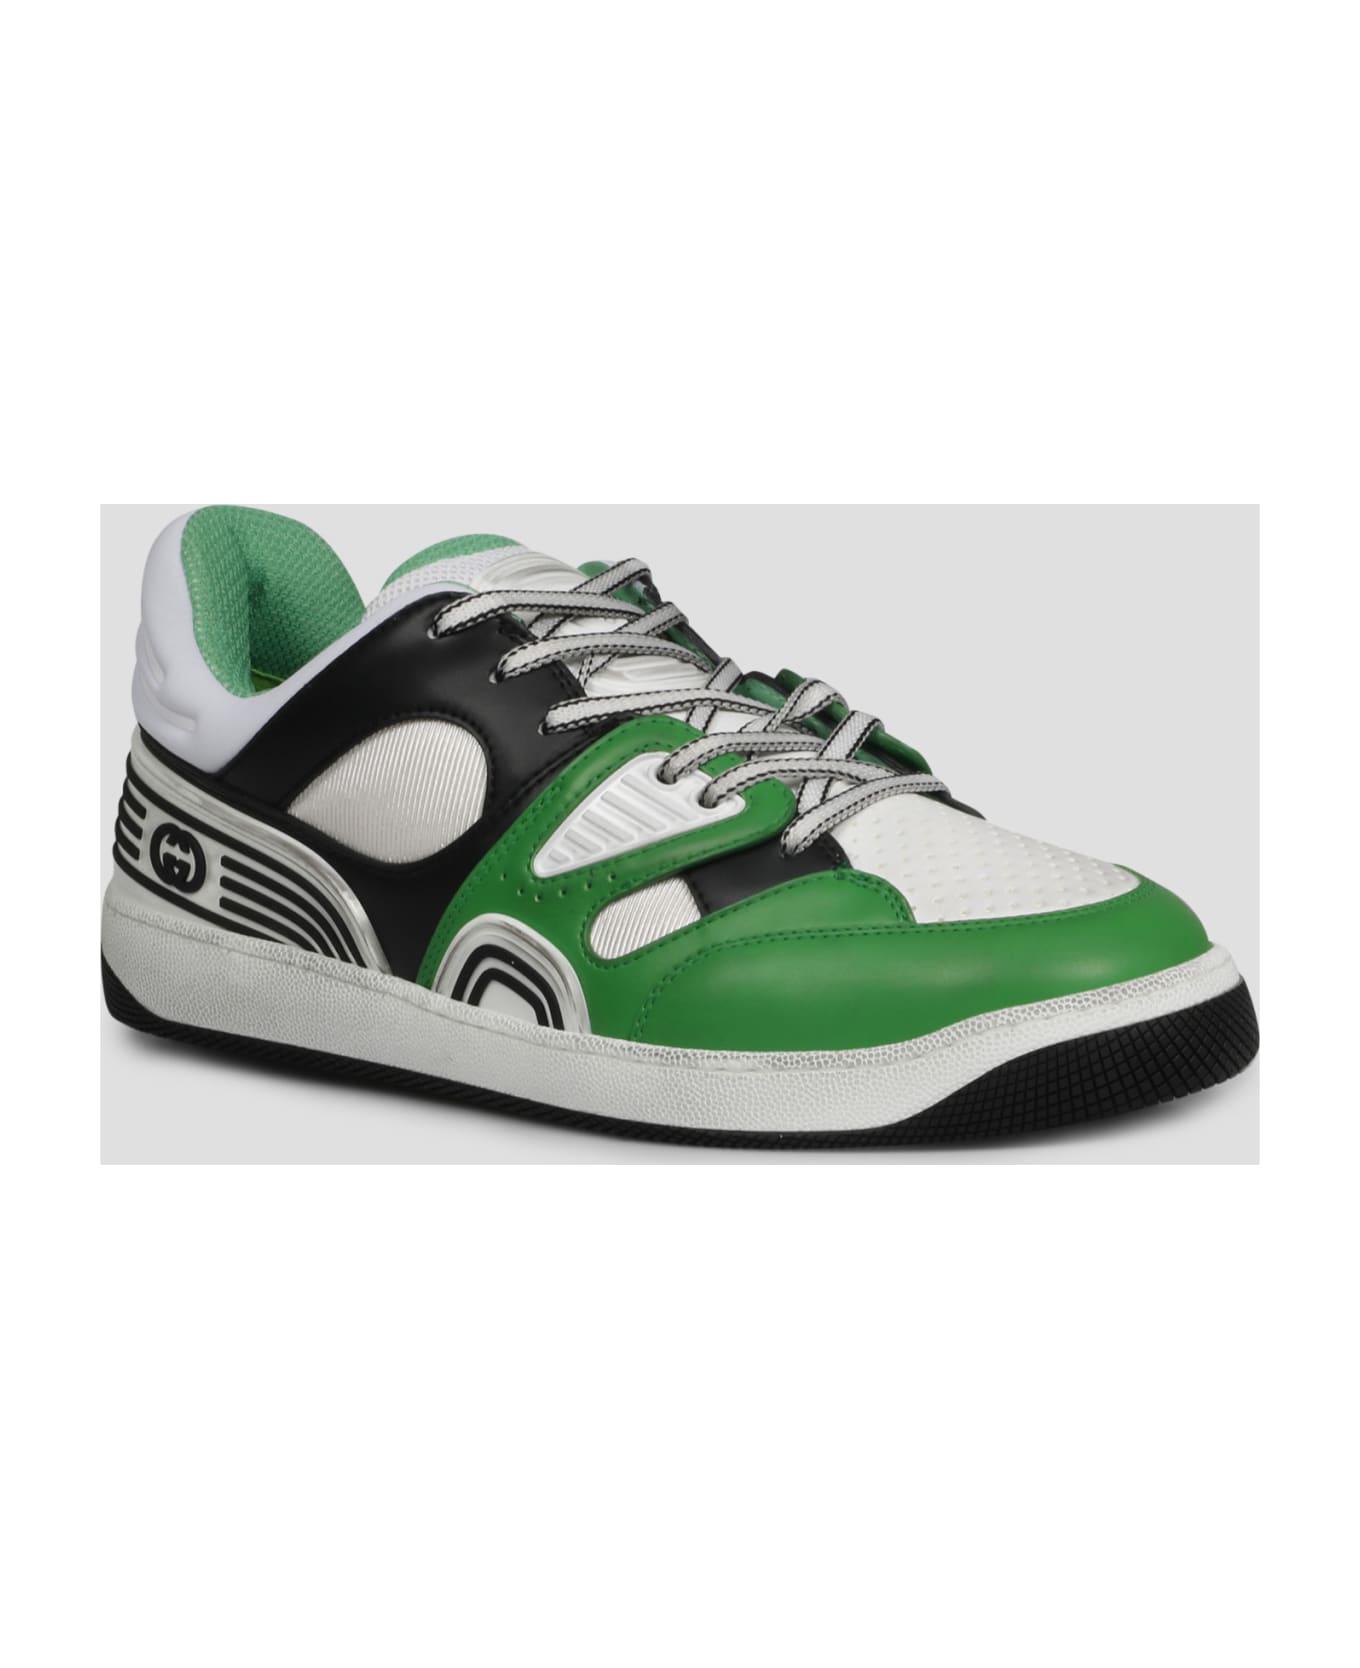 Gucci Basket Sneakers - Green